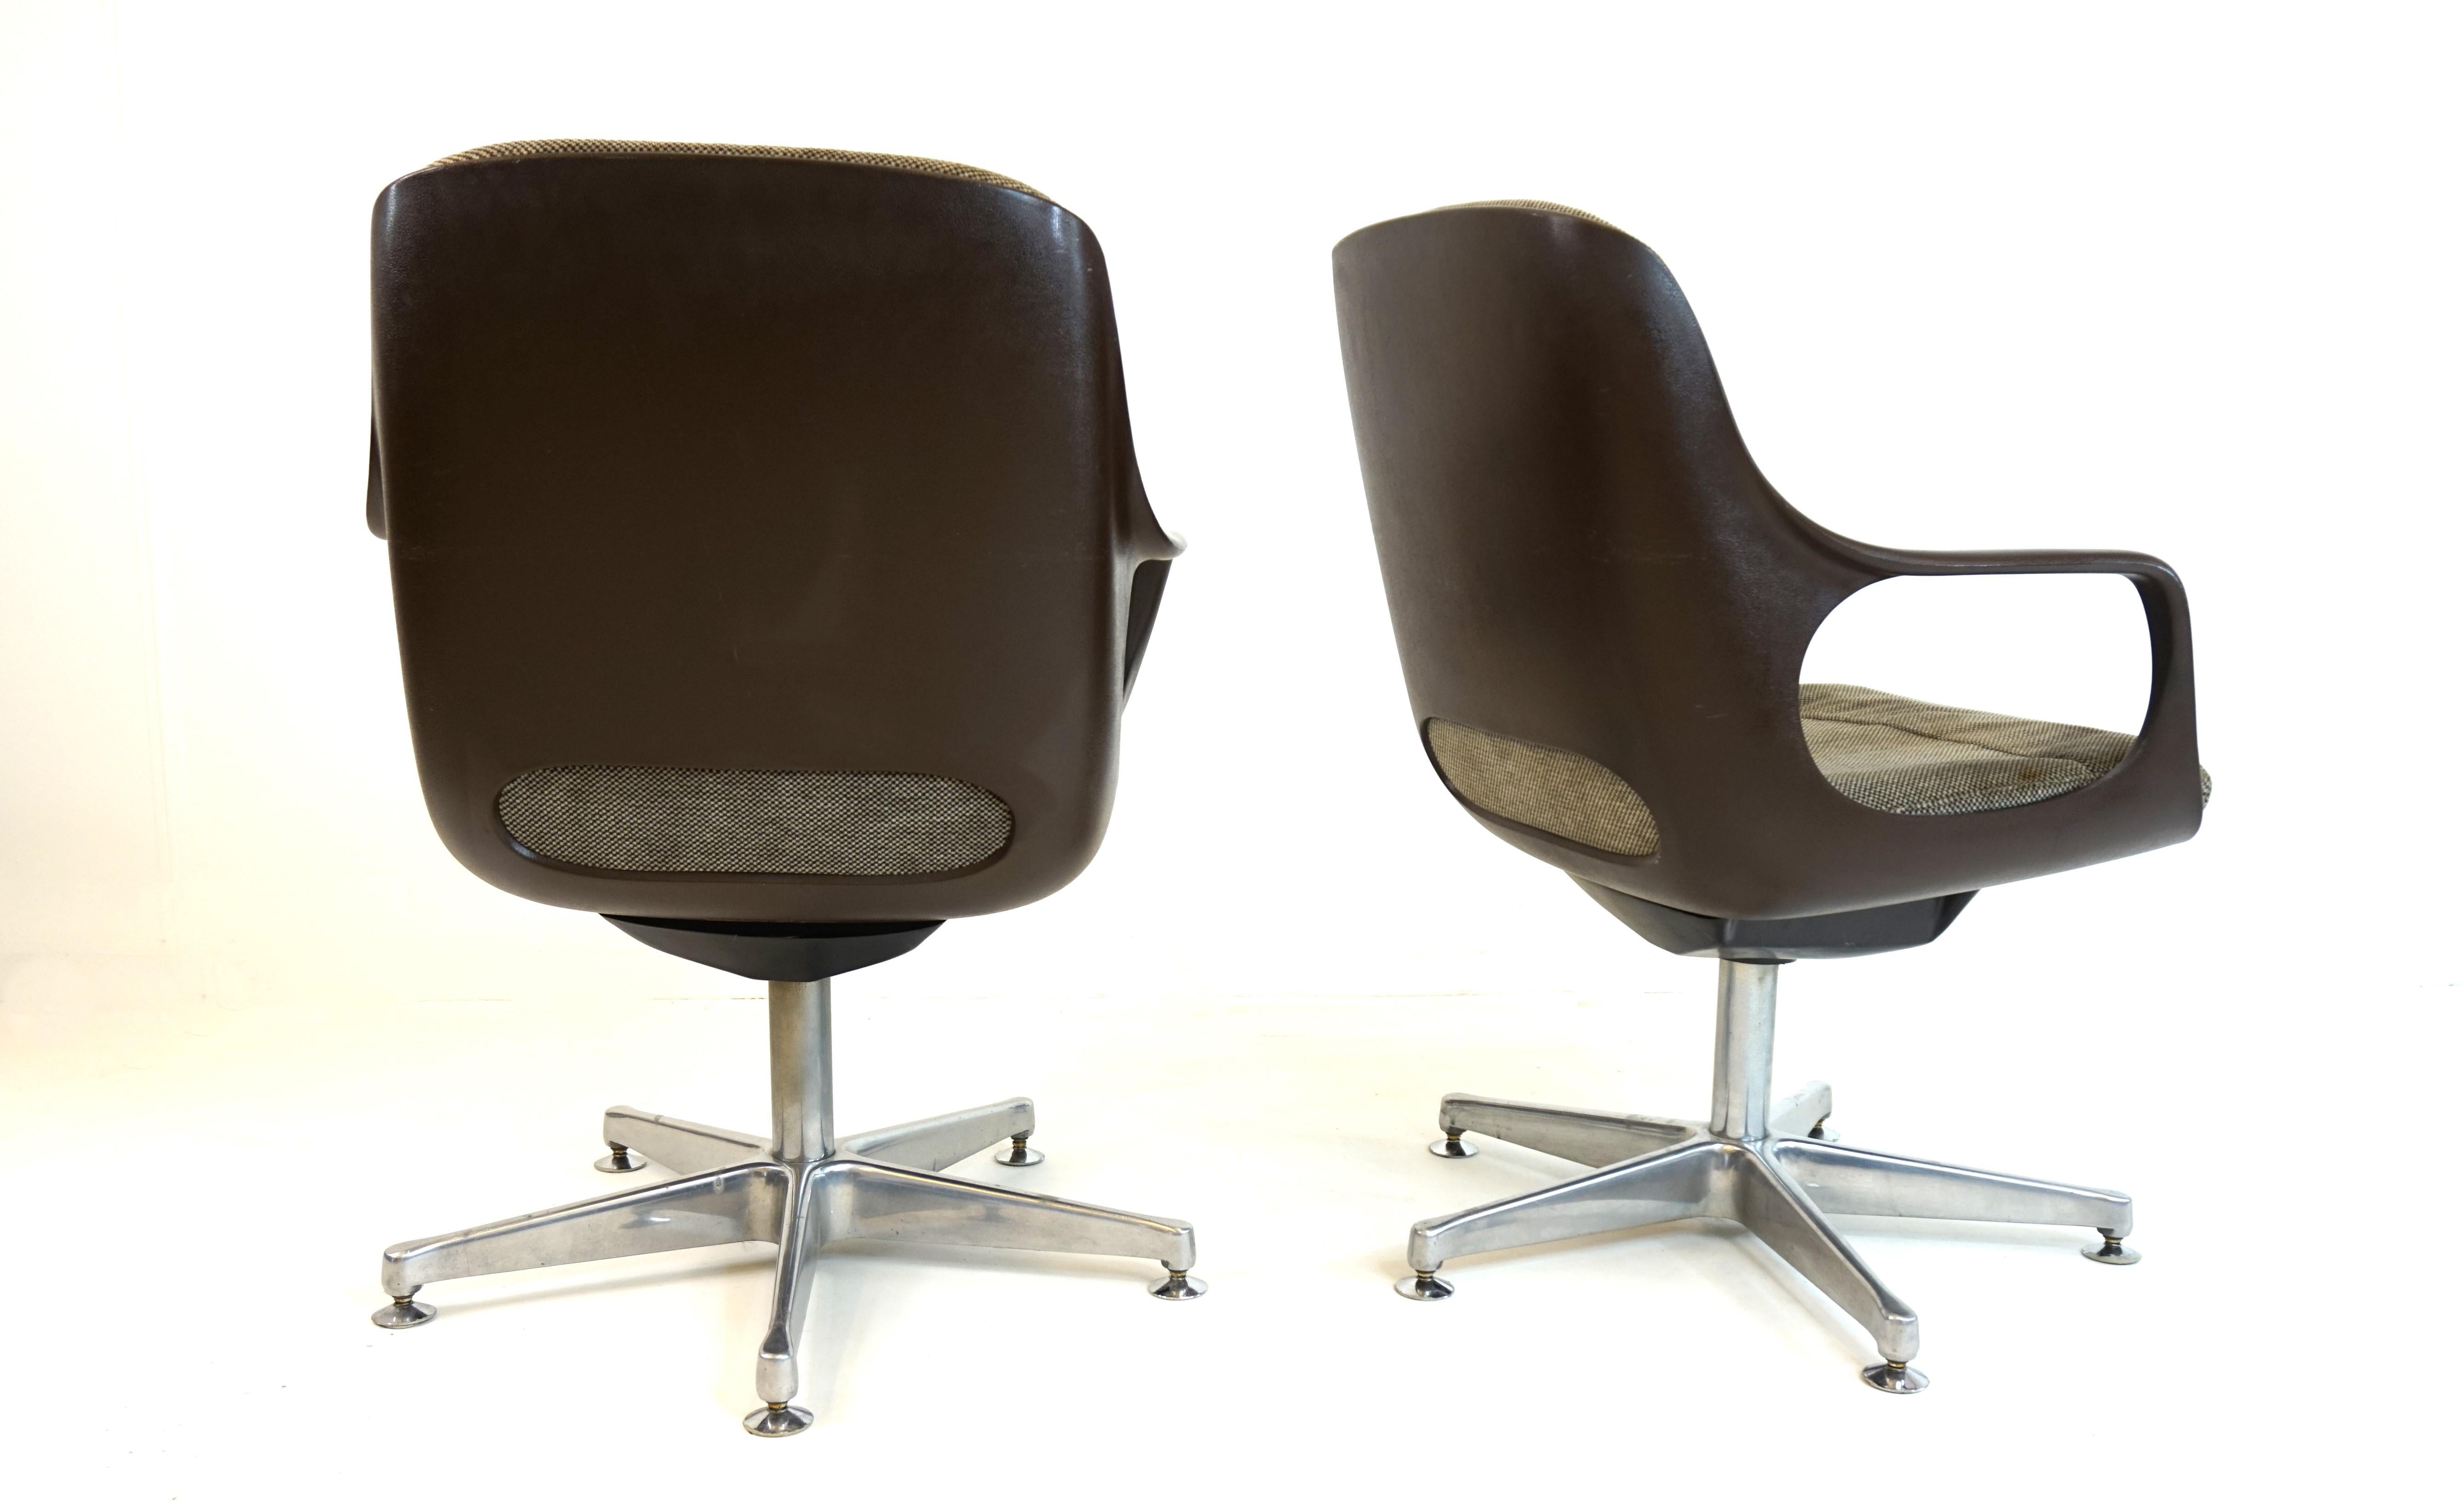 American Chromcraft Set of 2 Space Age Office/Dining Room Chairs